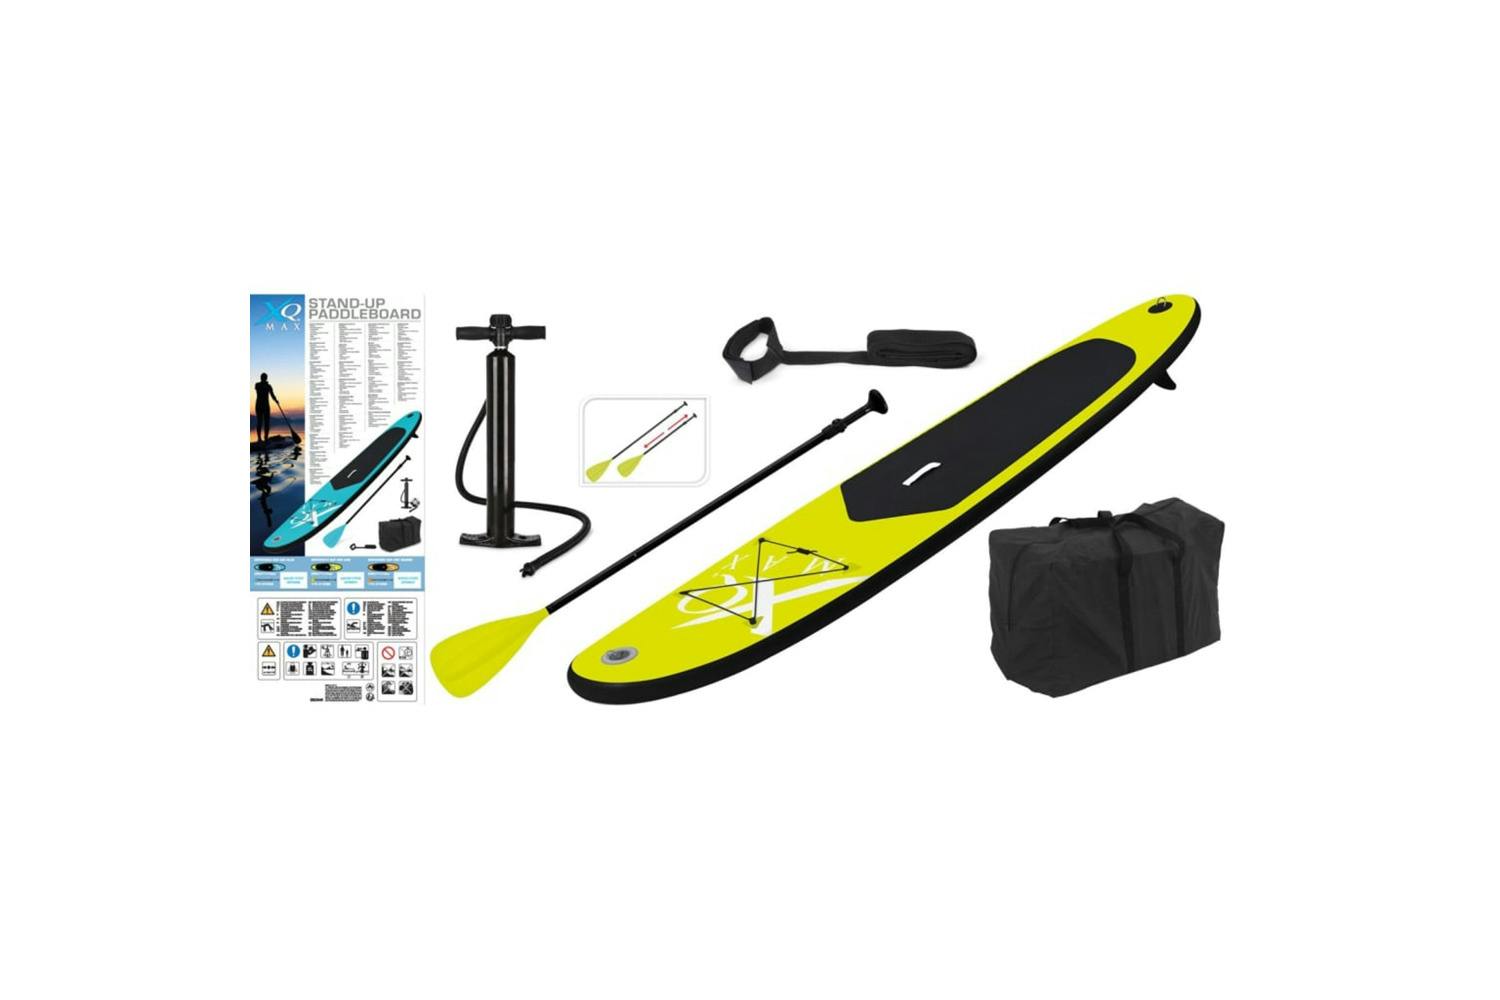 Xq Max 441937 Stand-up Paddle Board 285 Cm Inflatable Lime And Black